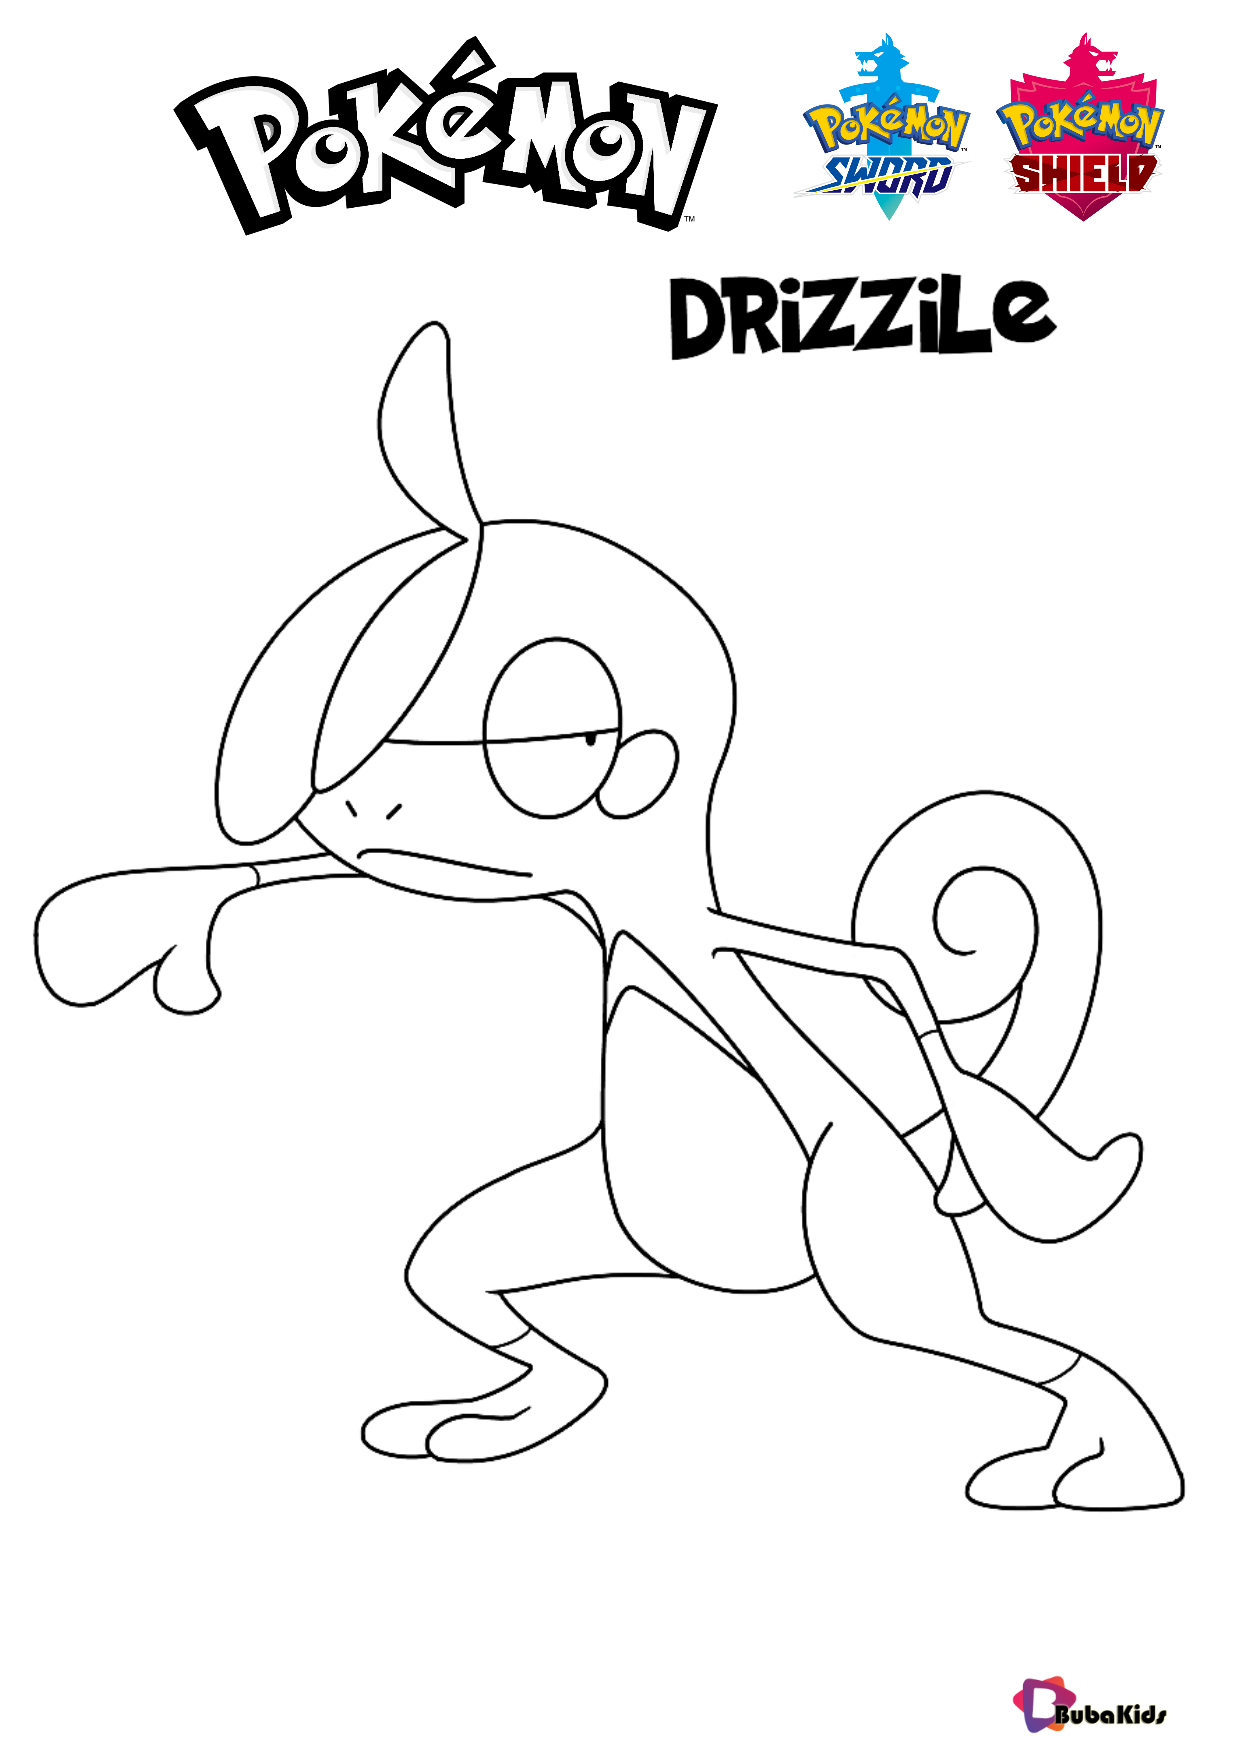 Pokemon Sword and Shield Pokemon Drizzile coloring pages Wallpaper